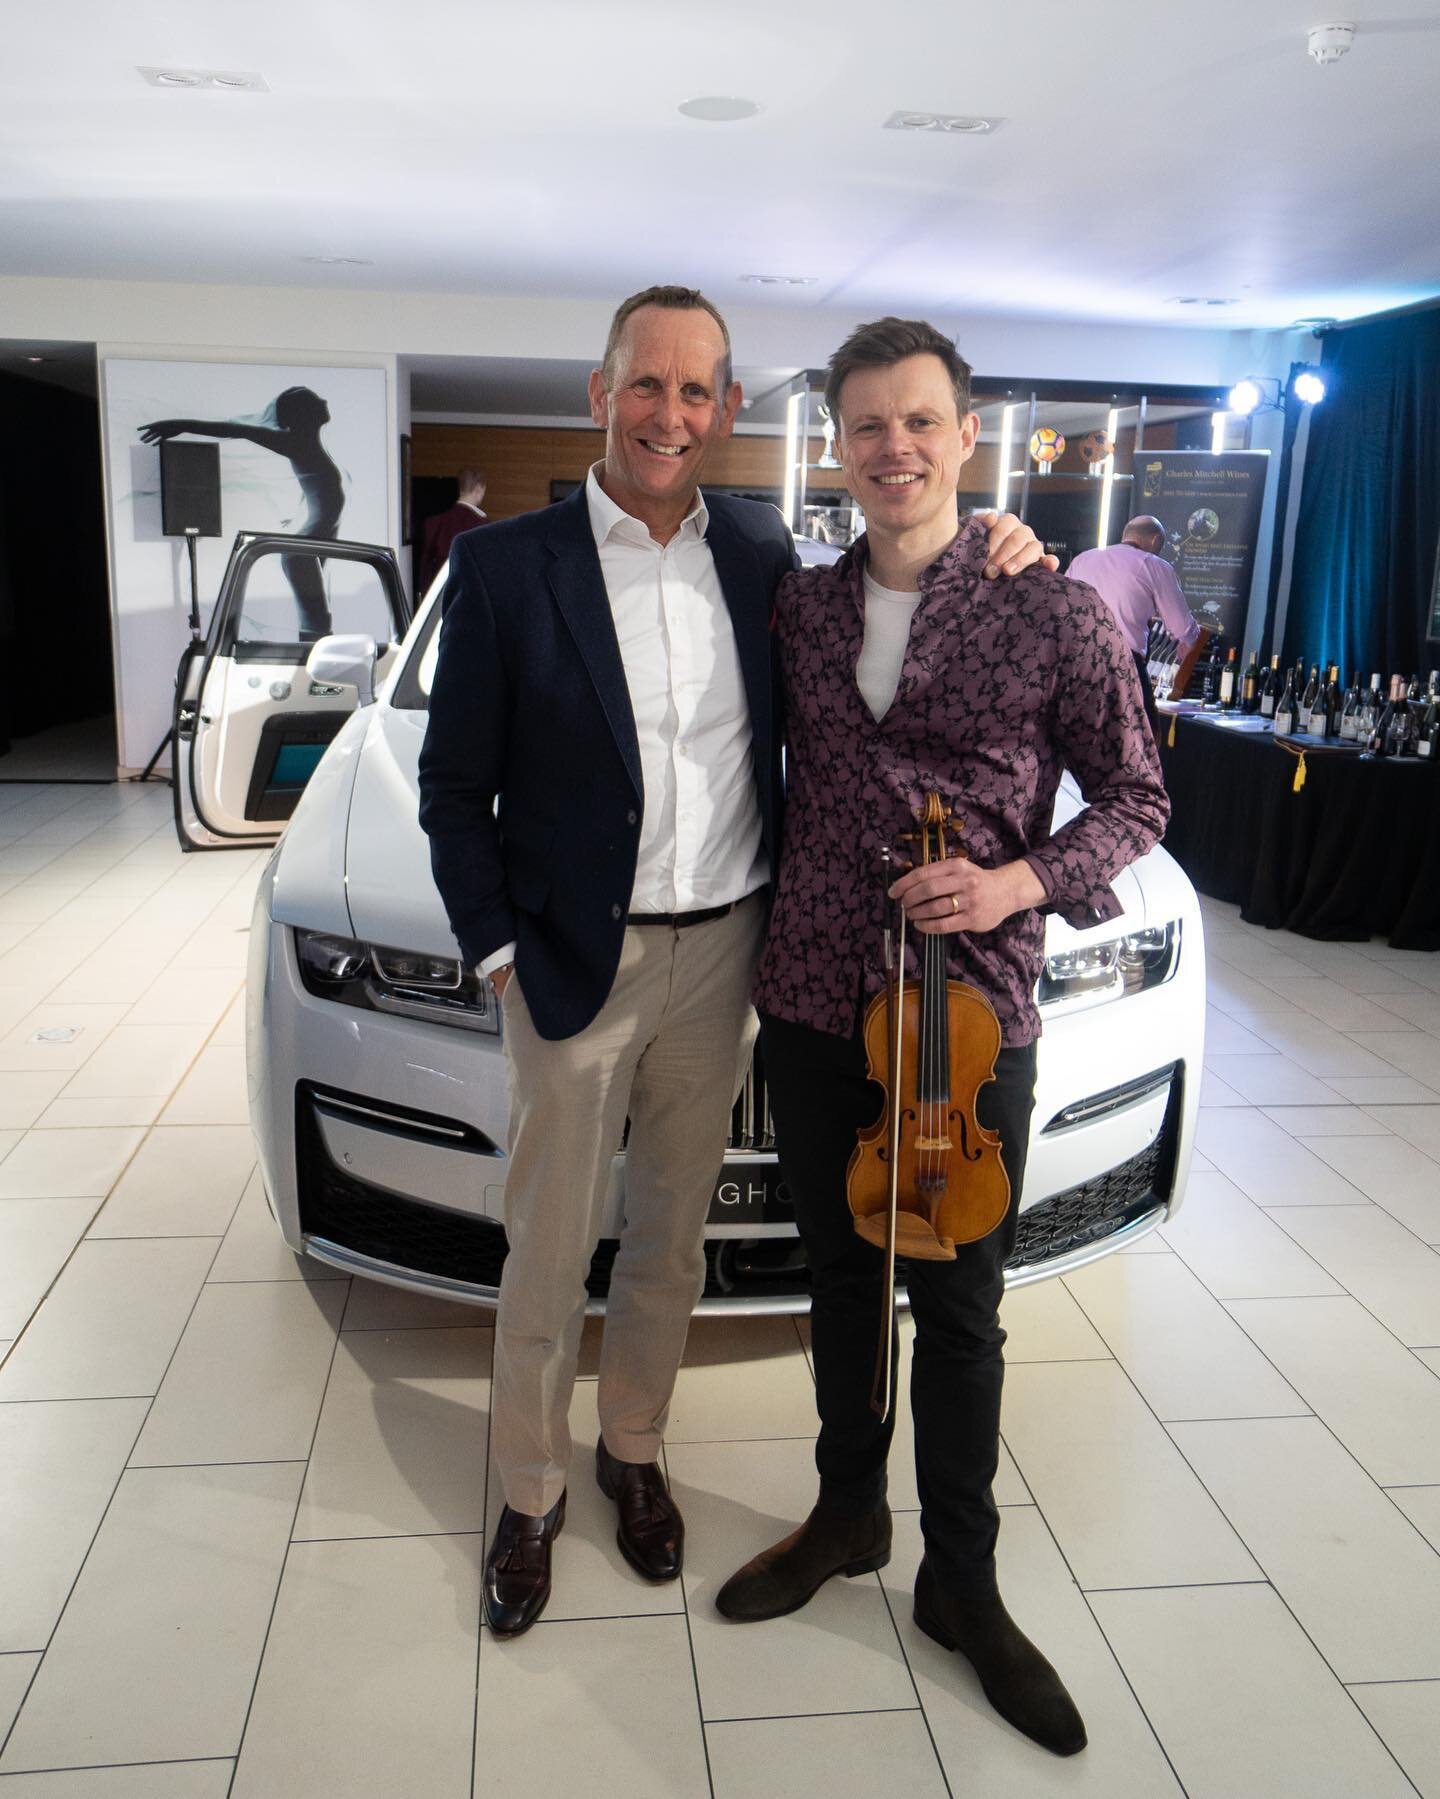 It was a huge privilege to be invited to perform my new Manchester Music set at Rolls Royce Manchester. It was such a wonderful evening @rollsroycemcr. The unveiling of the uniquely bespoke one-of-one inspired by Manchester Rolls Royce Ghost. Many th